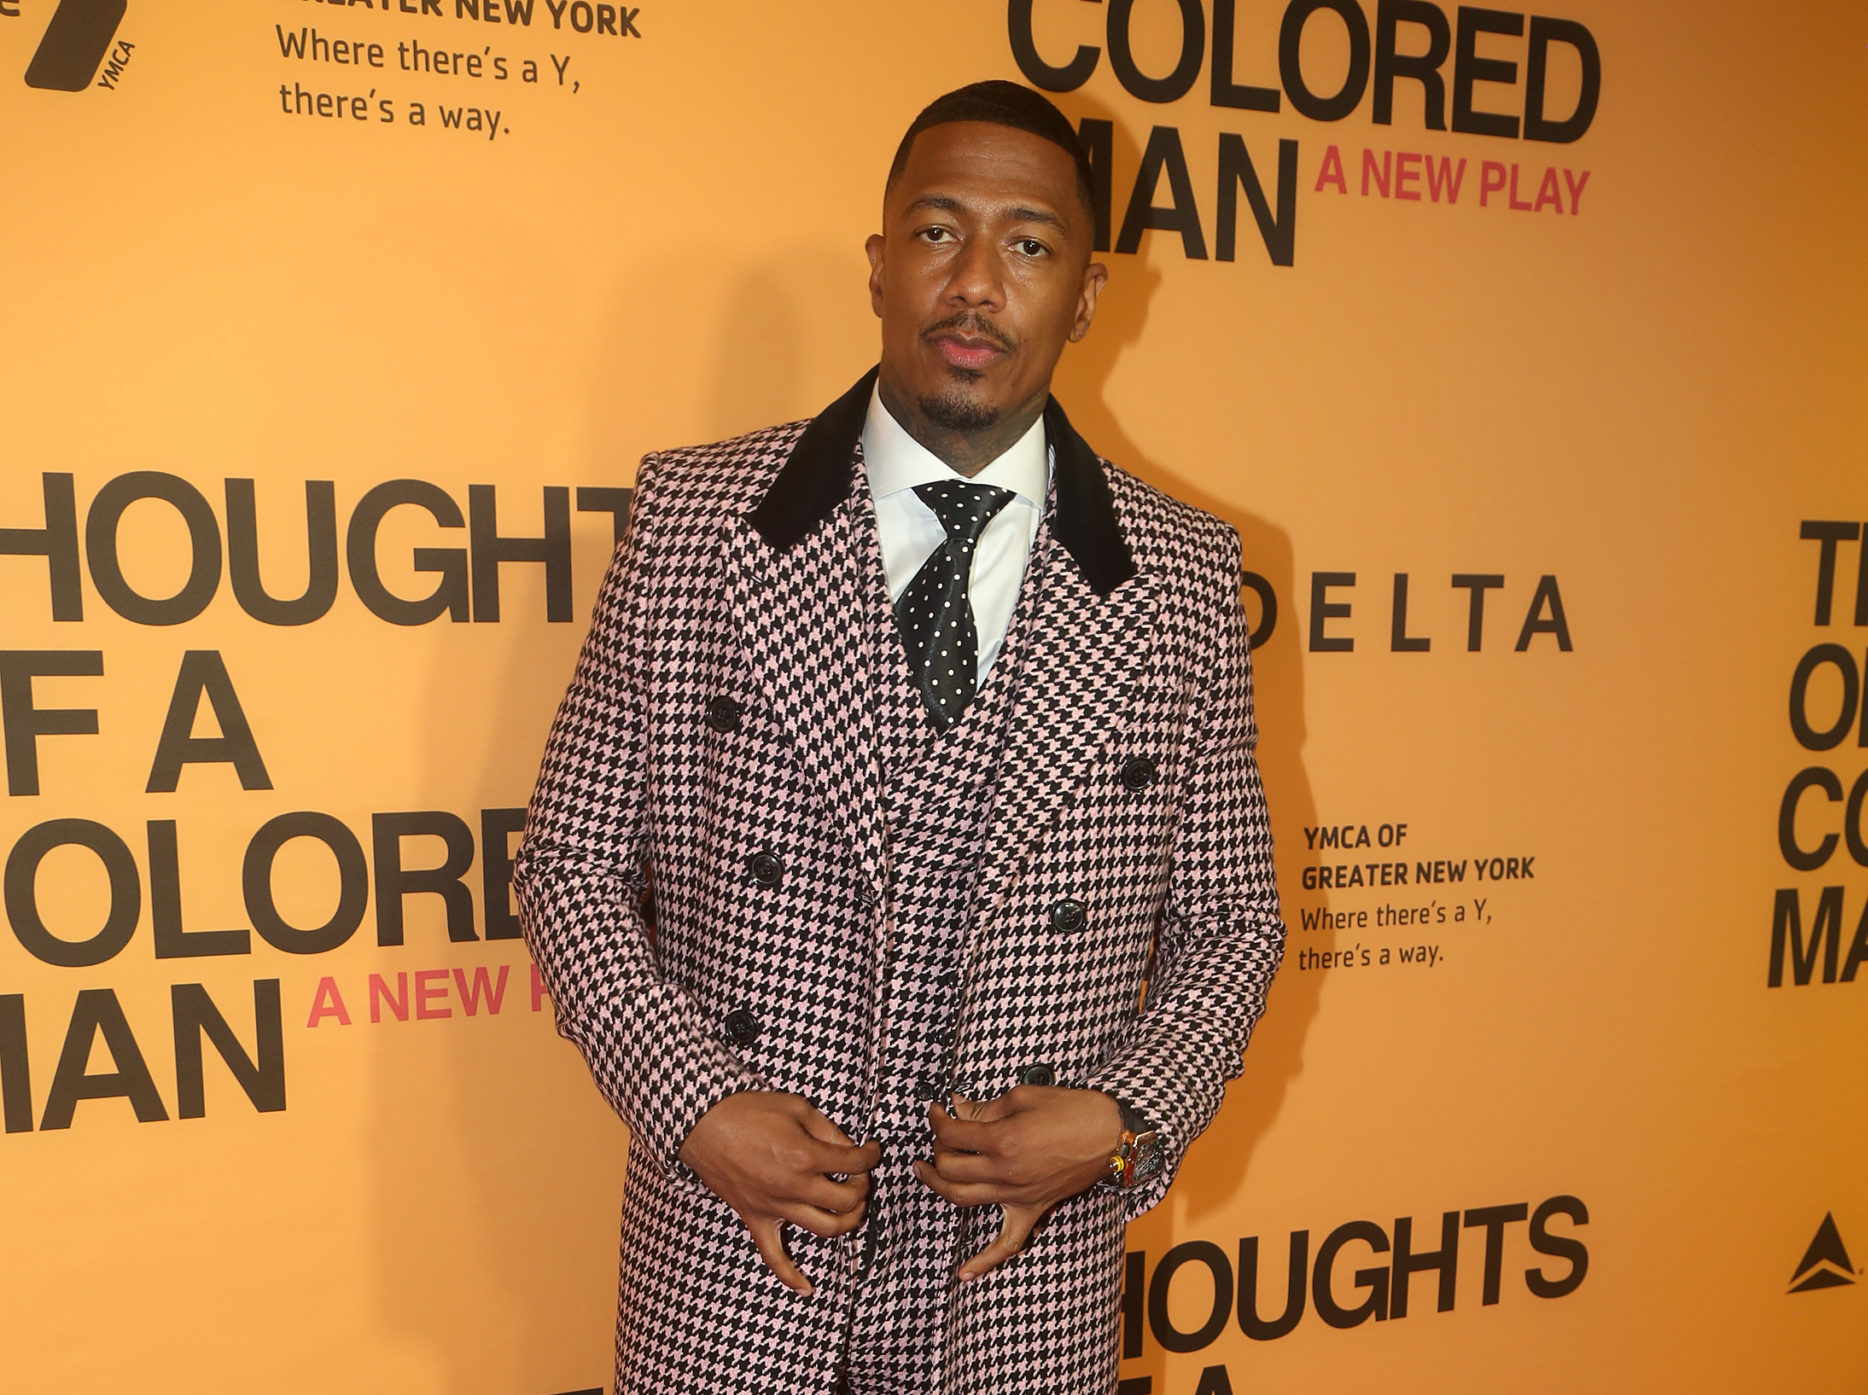 Nick Cannon Speaks About His Celibacy Journey (Video)